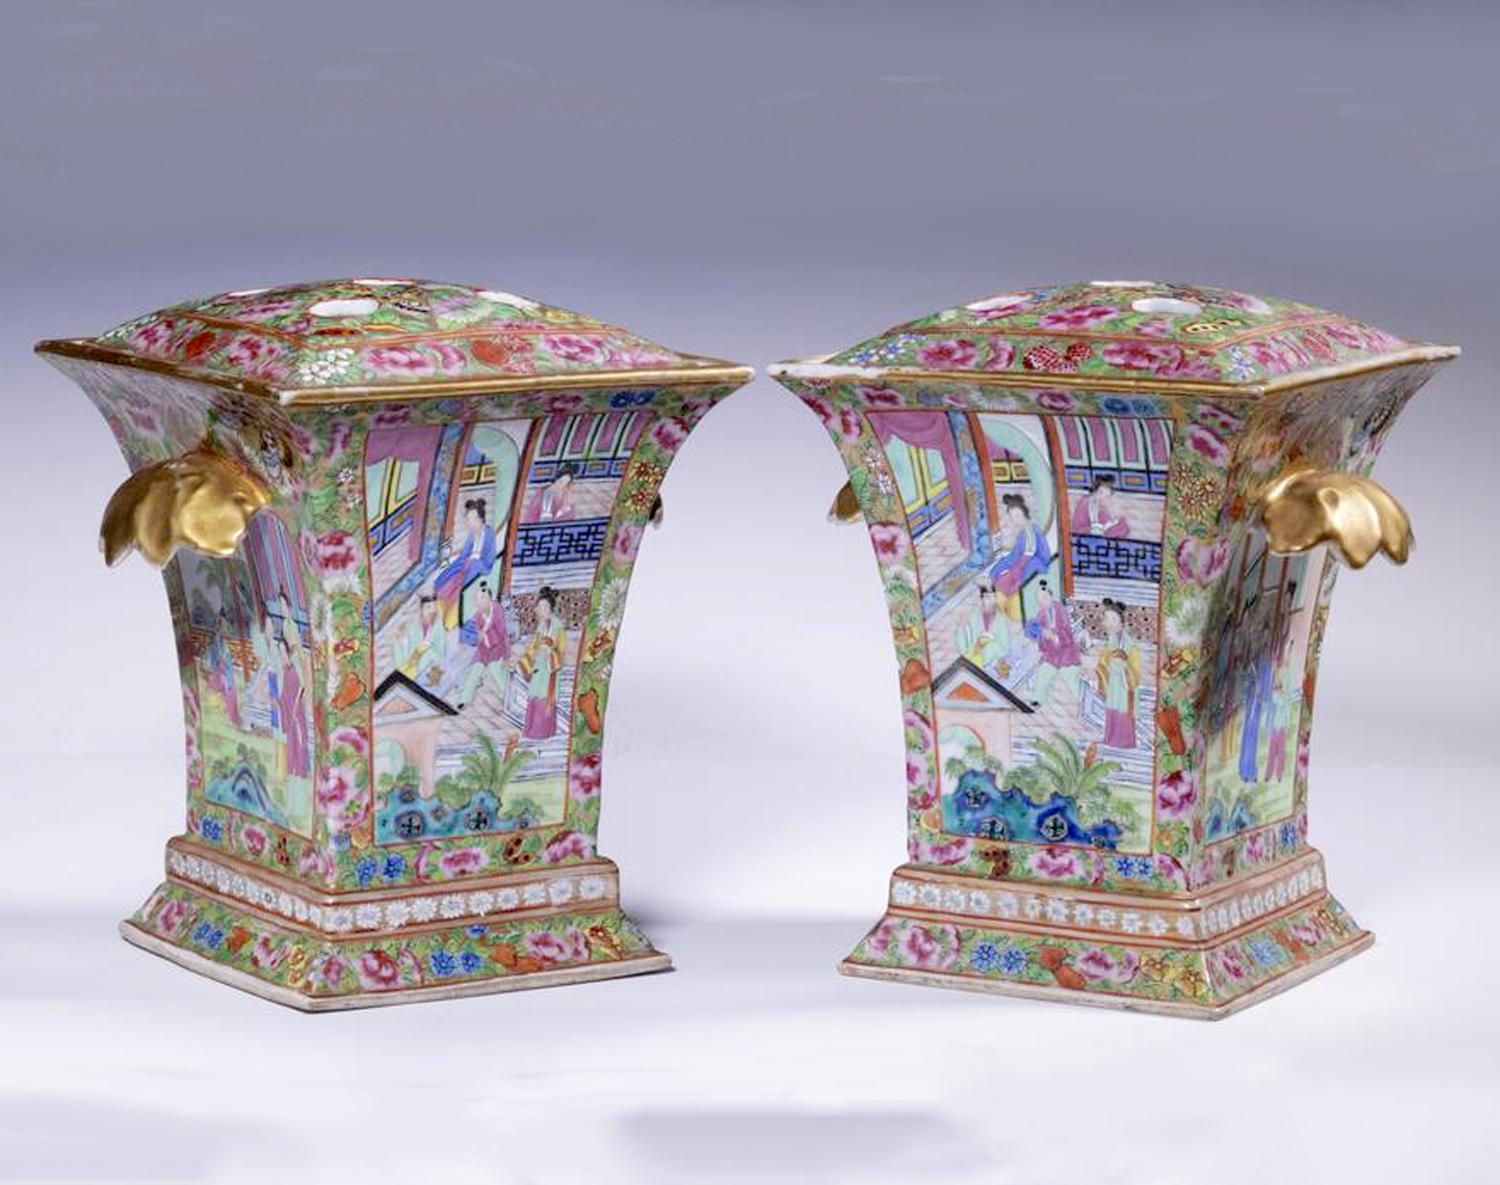 Rare Chinese Export Porcelain Rose Medallion Bough Pots & Covers,
Circa 1860.

The large Chinese Export porcelain square bough pots with a flaring foot and rim have panels on all four sides which are painted with scenes of domestic life. The panels